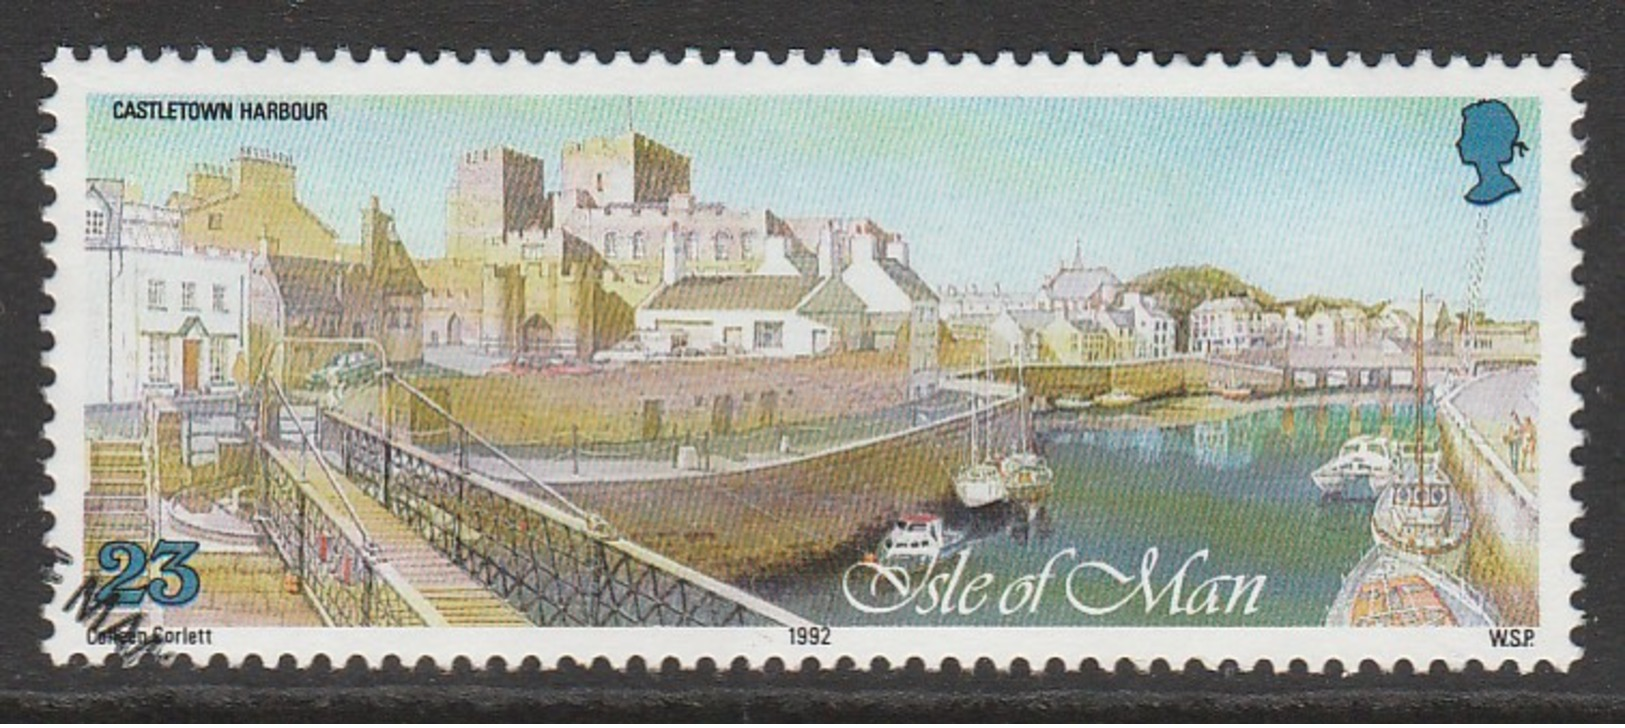 Isle Of Man 1992 The 200th Anniversary Of The Extension Of Manx Seaports 23 P Multicolored SW 508 O Used - Isle Of Man